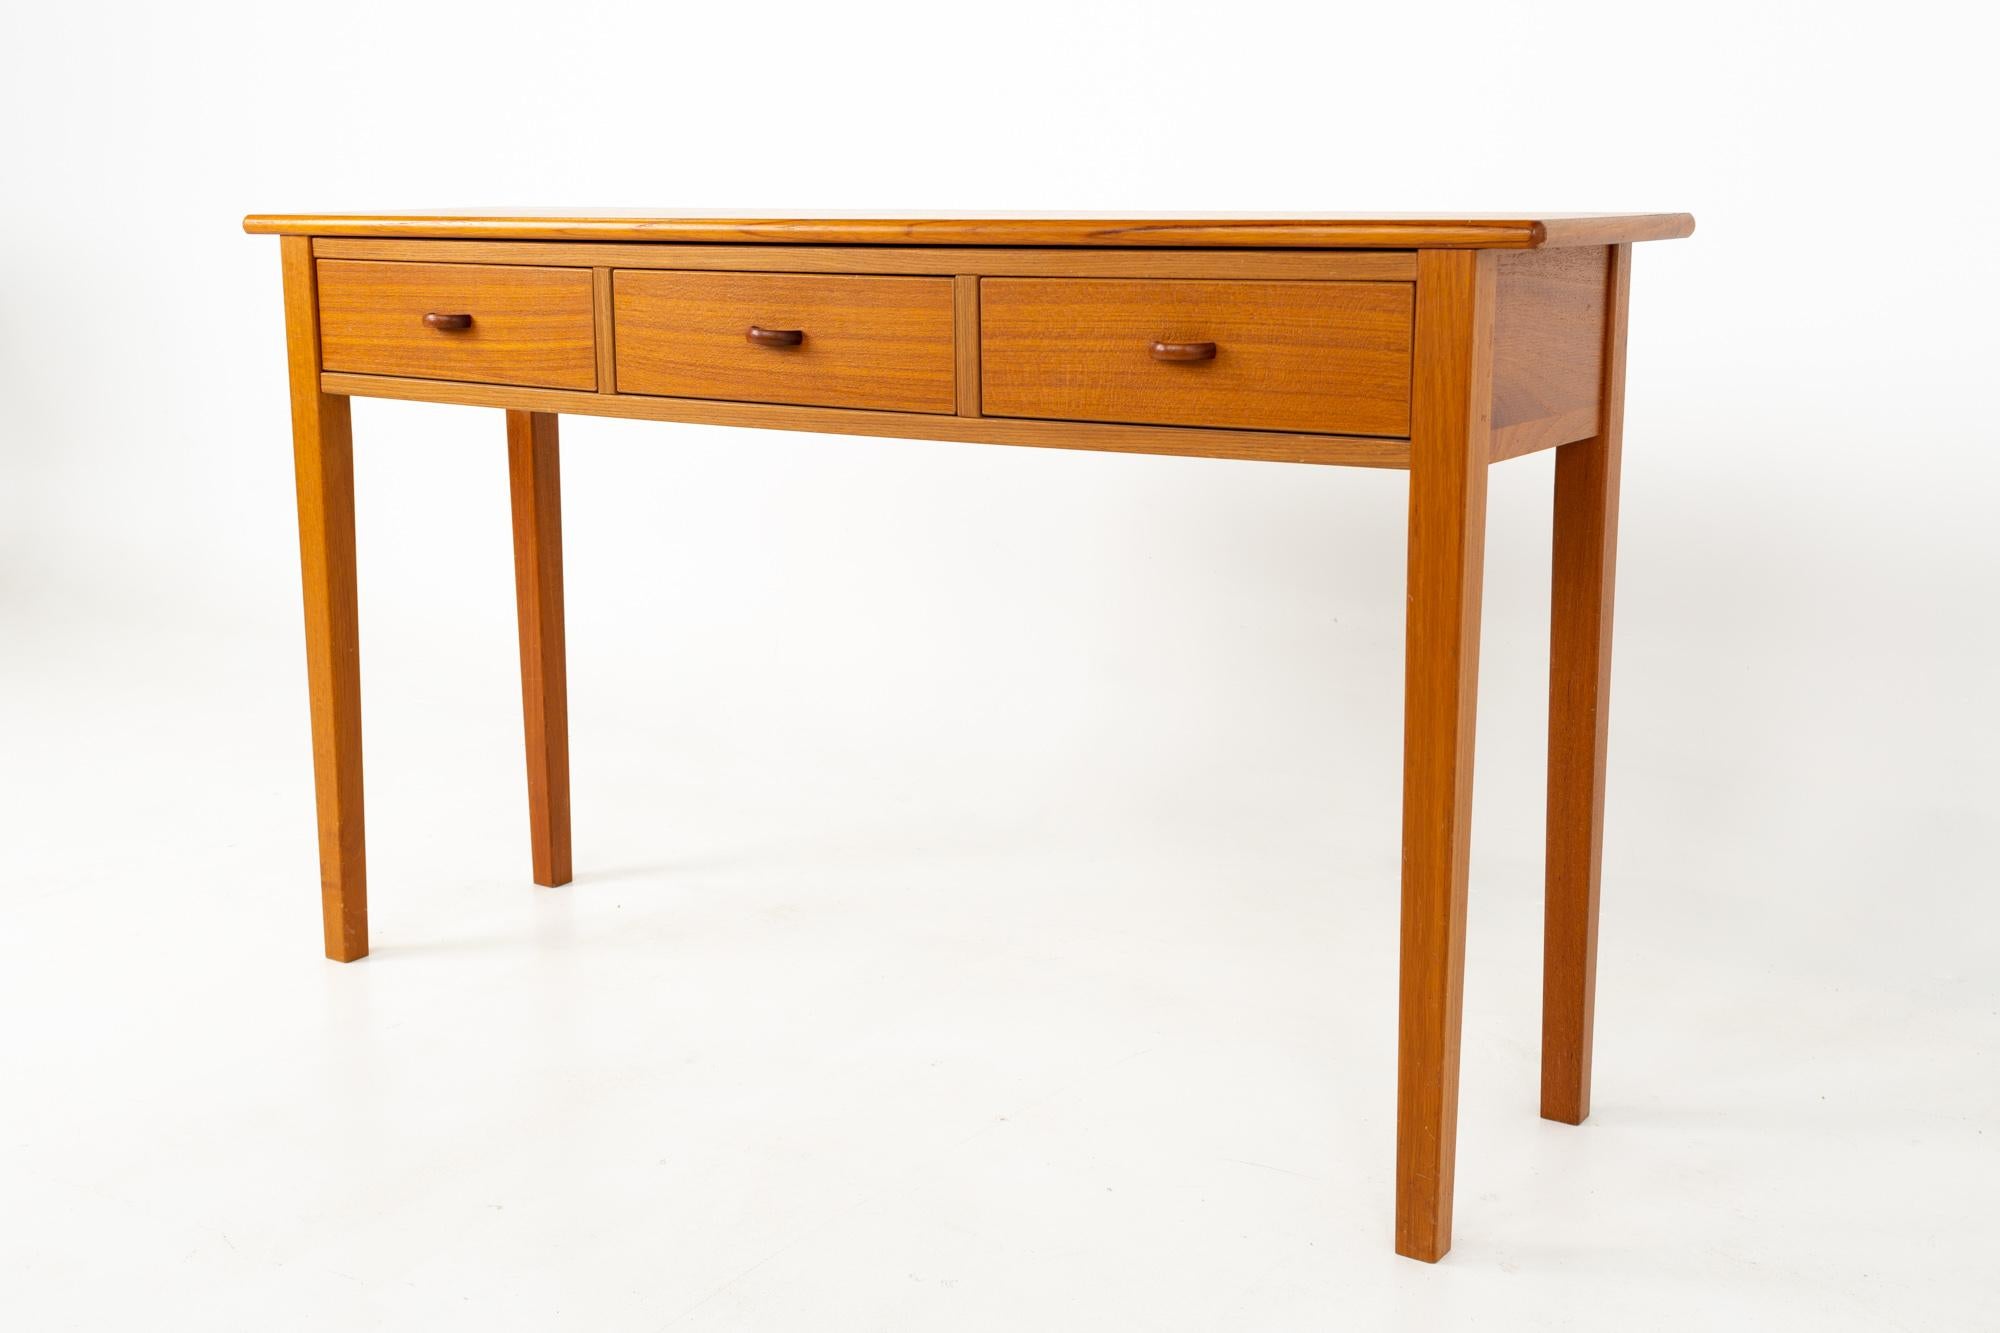 Mid century teak 3 drawer sofa table foyer entry console
This table is 51 wide x 14 deep x 29.5 inches high

All pieces of furniture can be had in what we call restored vintage condition. That means the piece is restored upon purchase so it’s